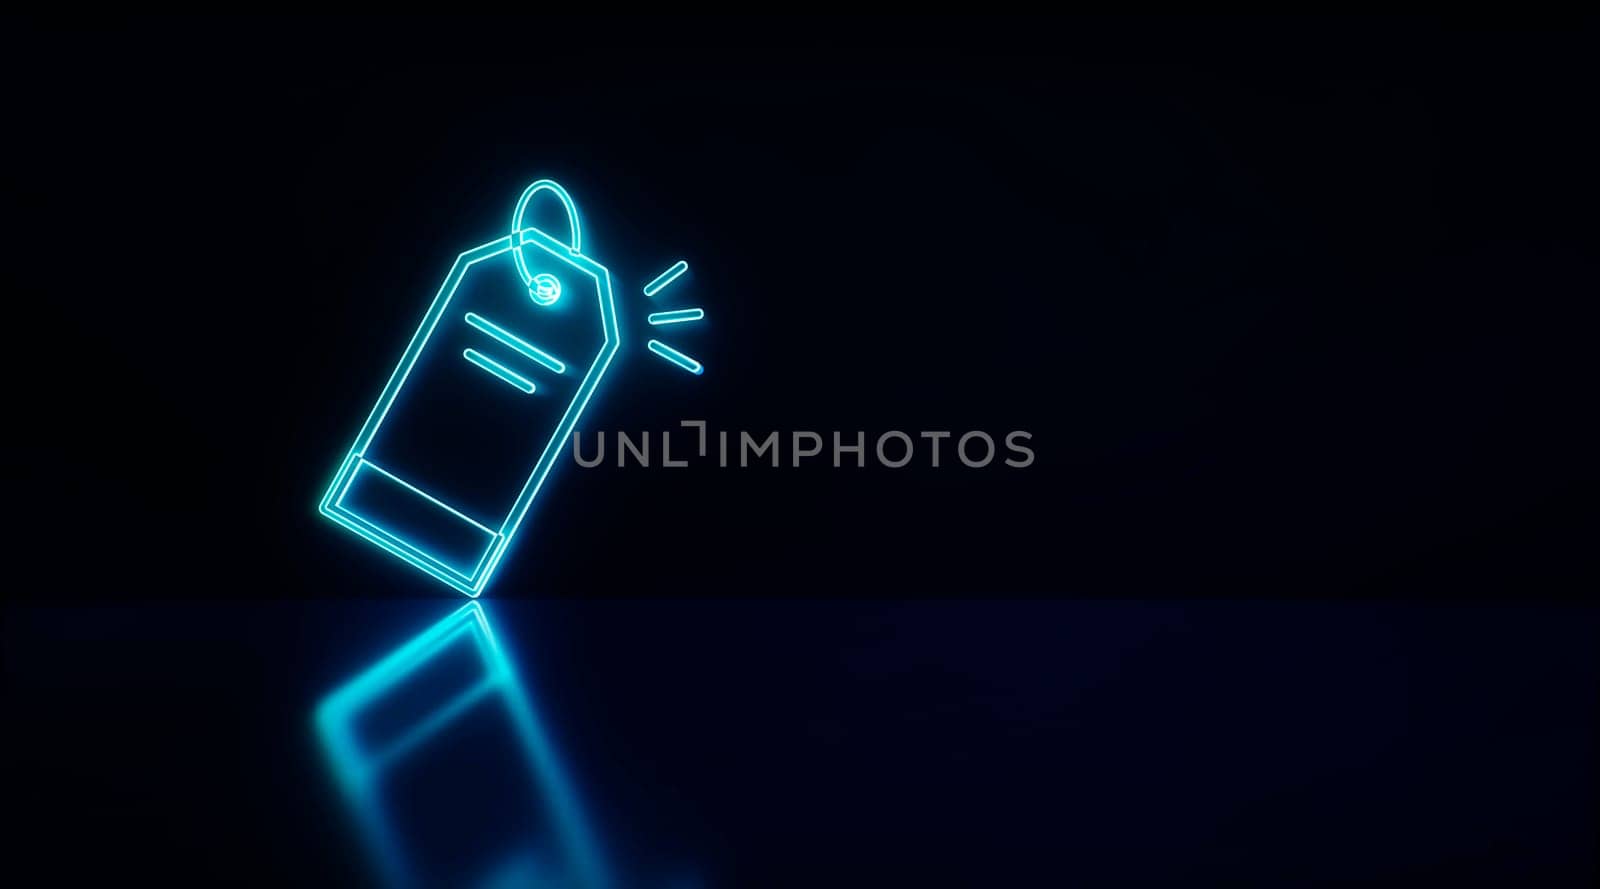 Tag neon icon for discount on blue background. 3D rendering.